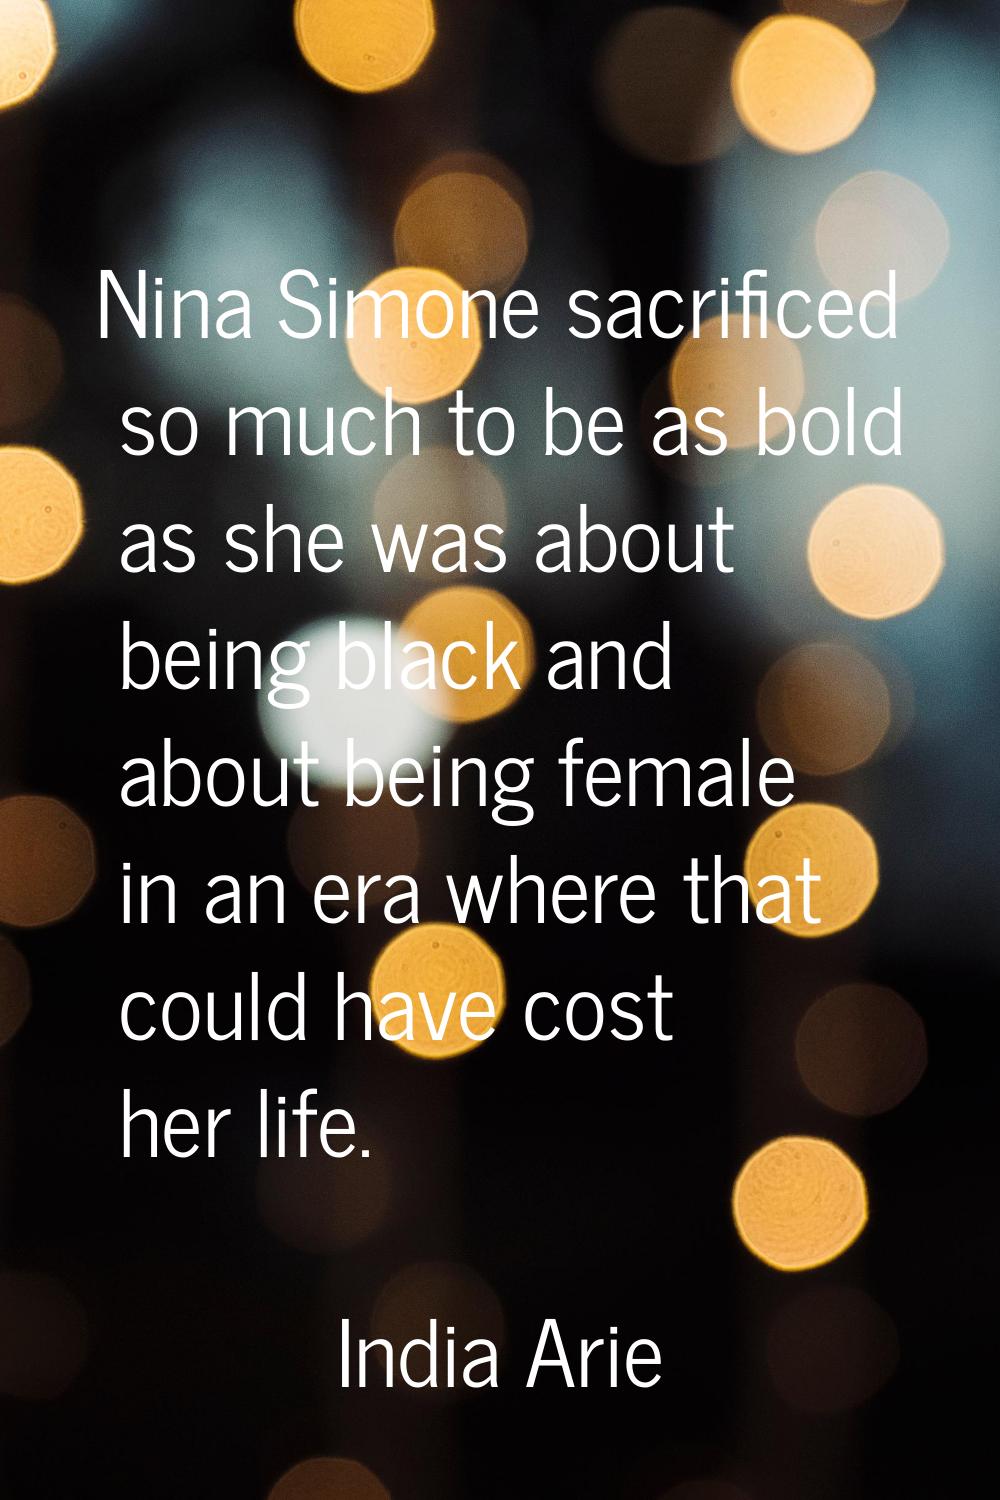 Nina Simone sacrificed so much to be as bold as she was about being black and about being female in